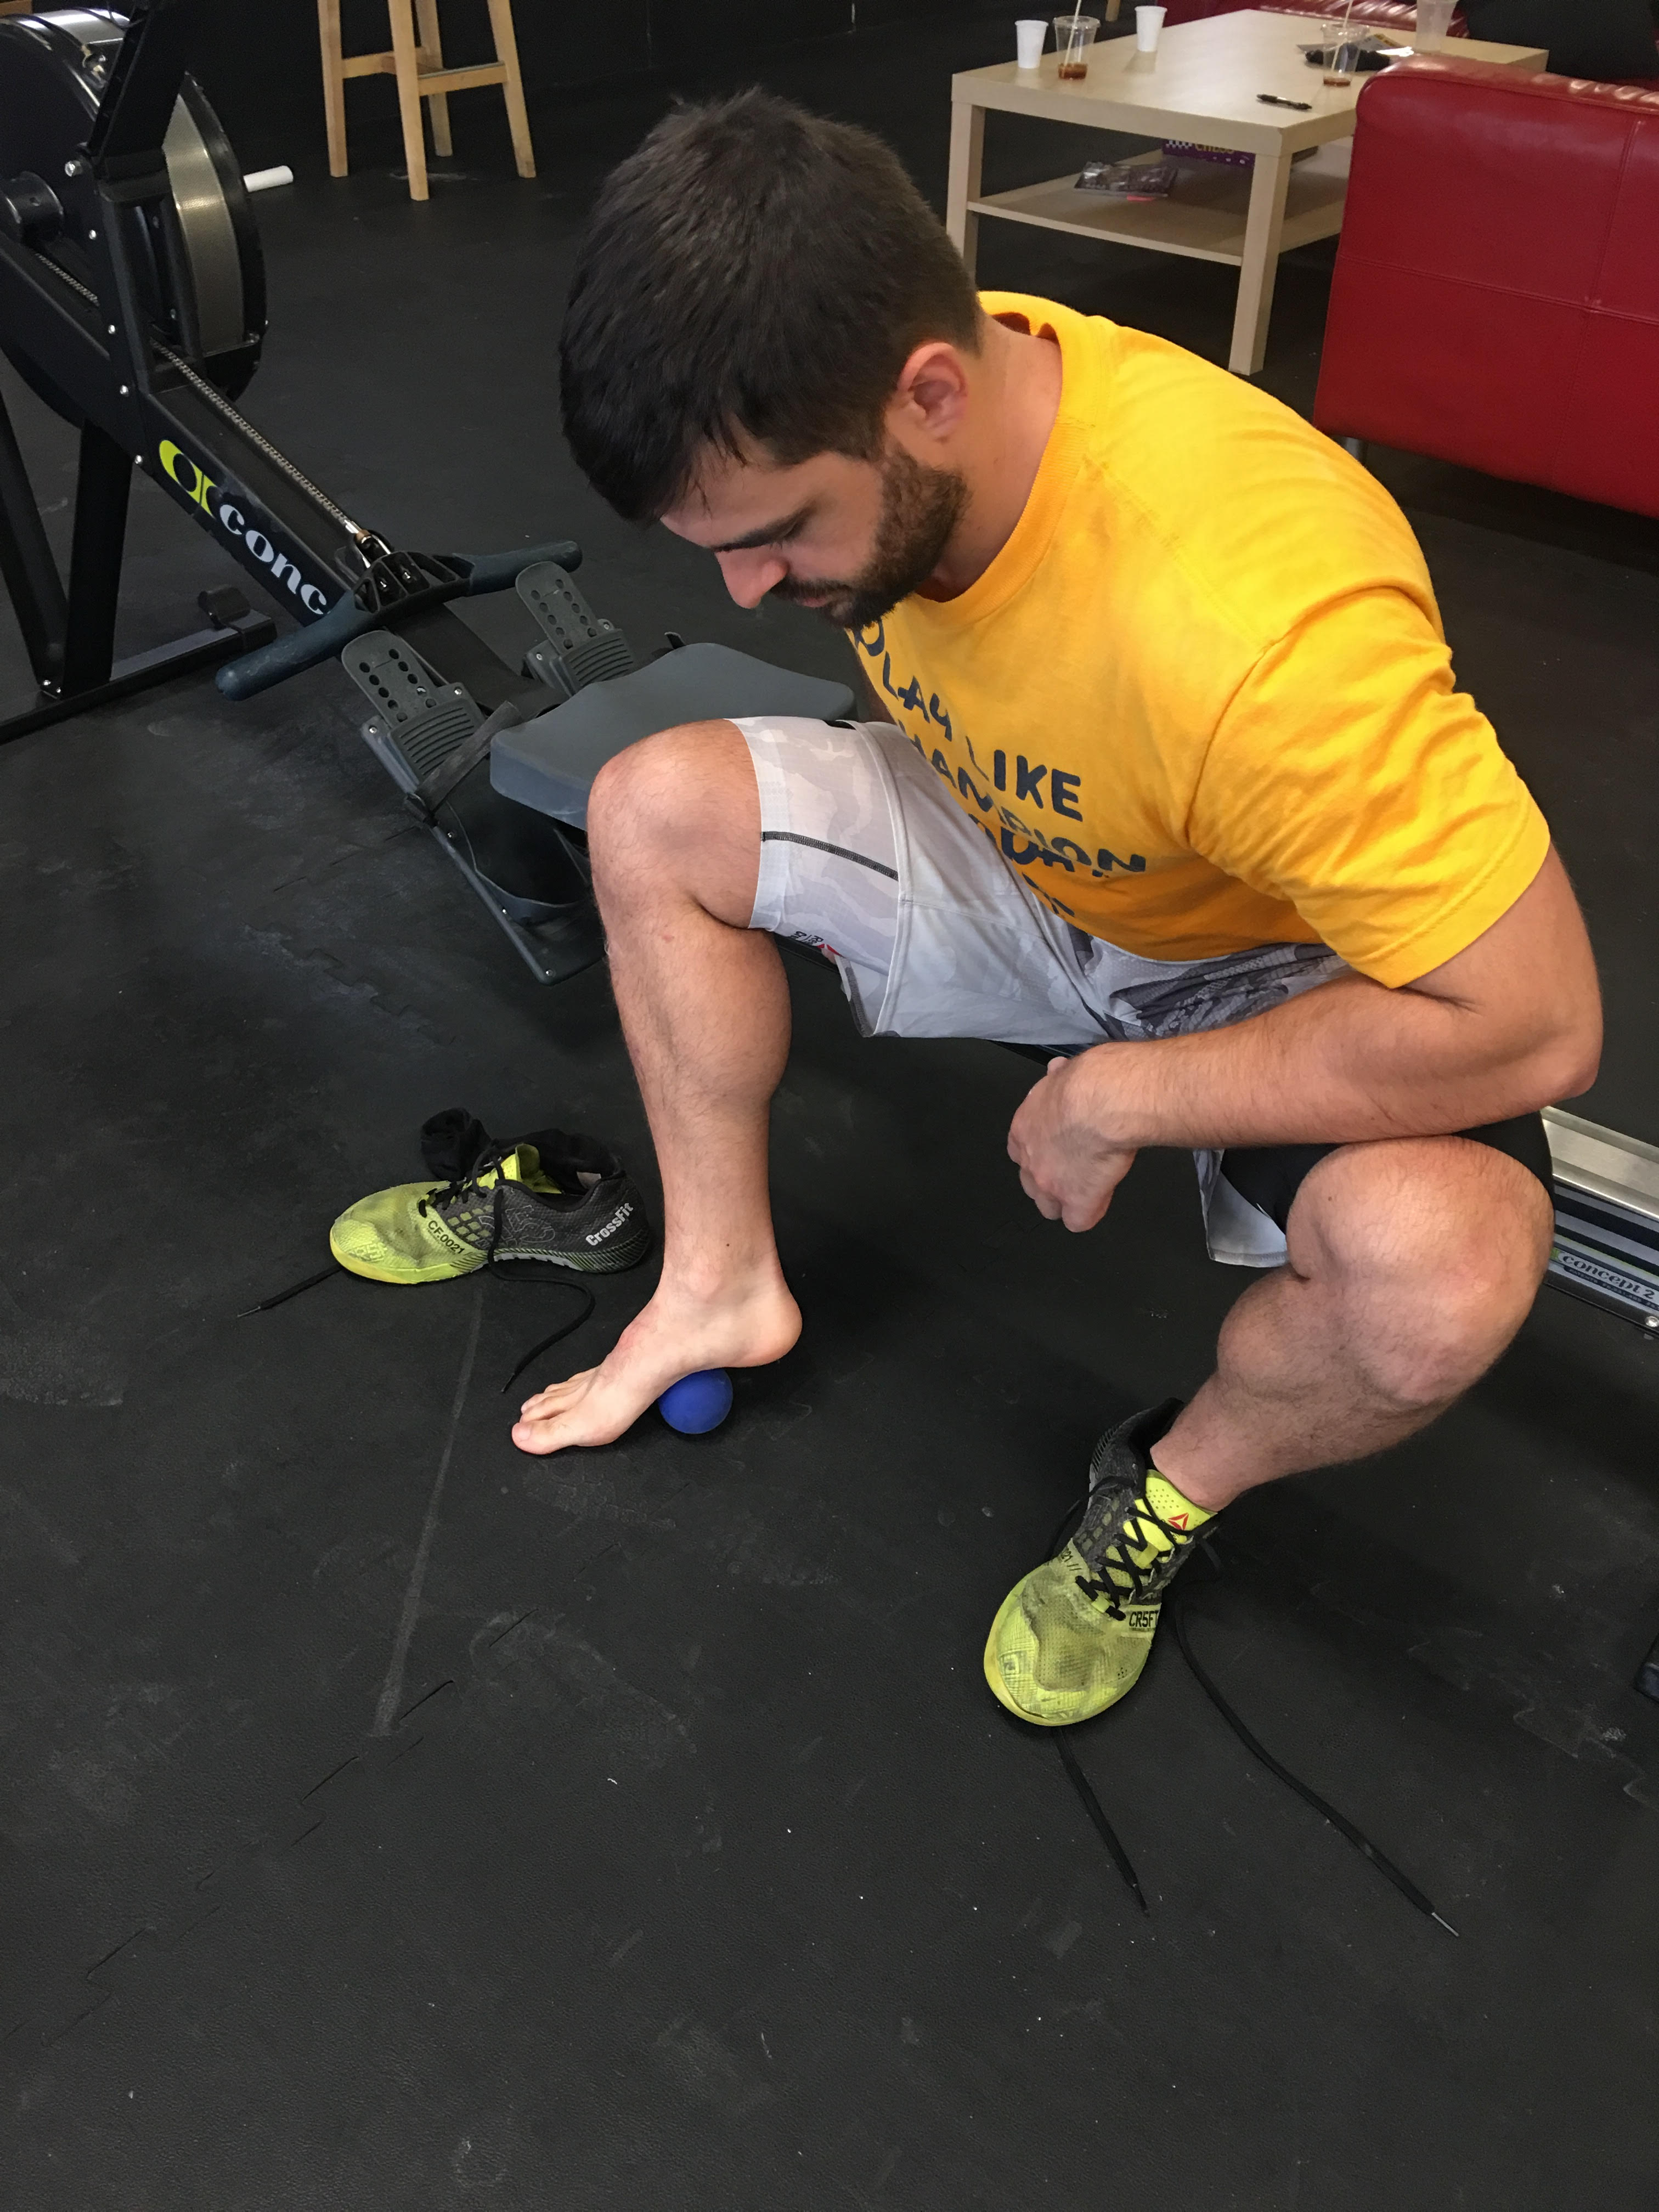 Foot Mobility